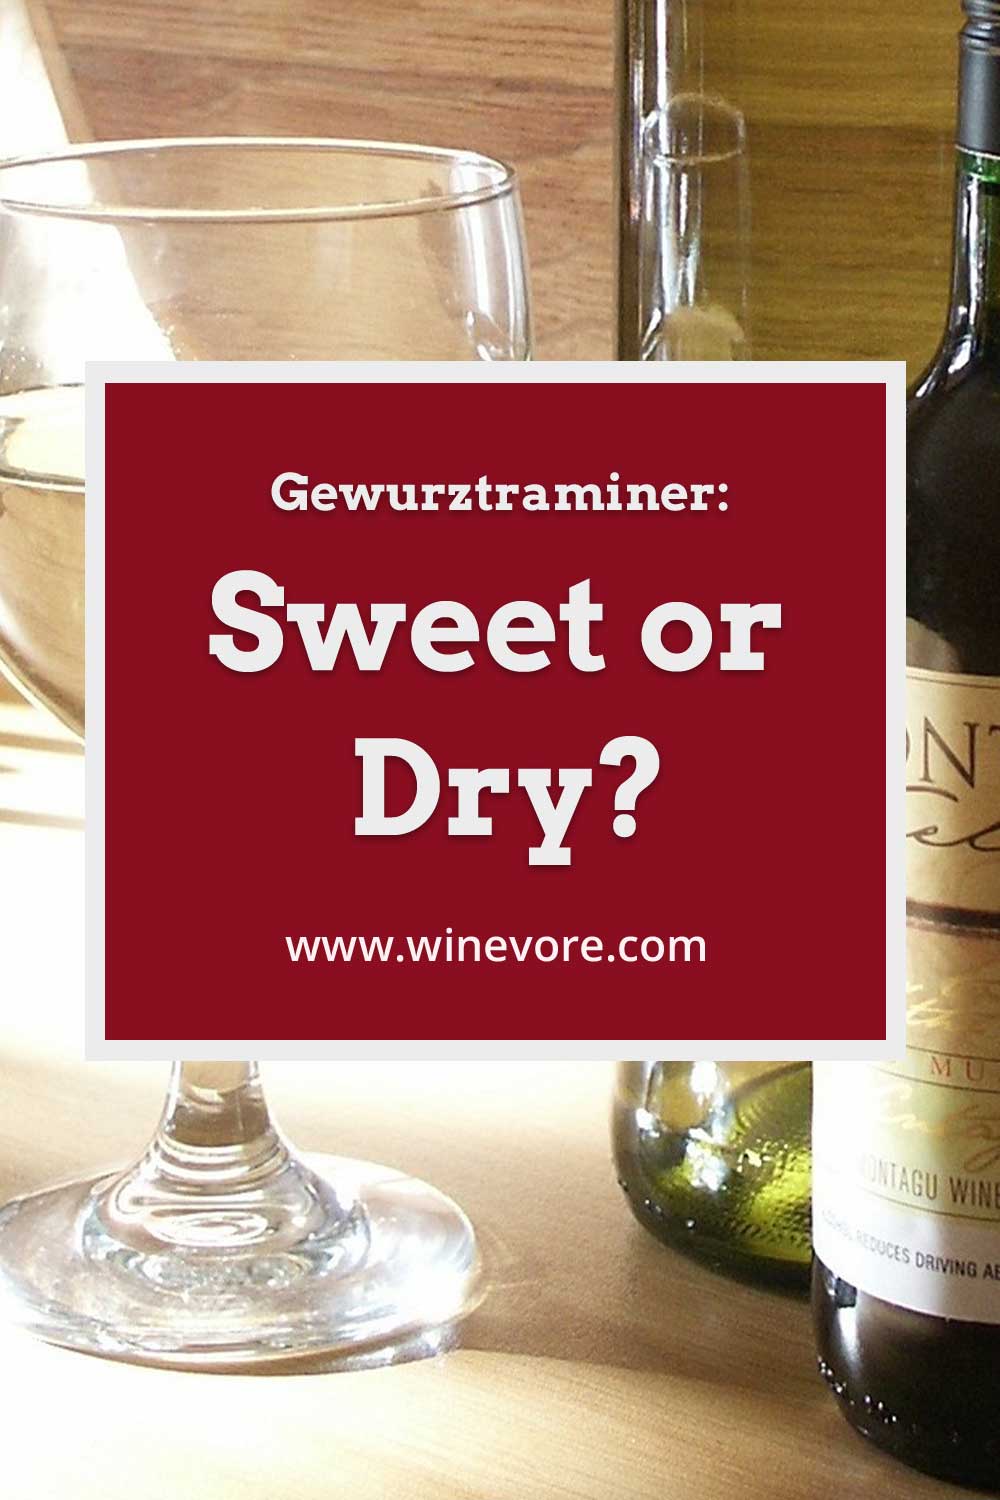 White wine glass and bottles on wooden surface - Gewurztraminer: Sweet or Dry?